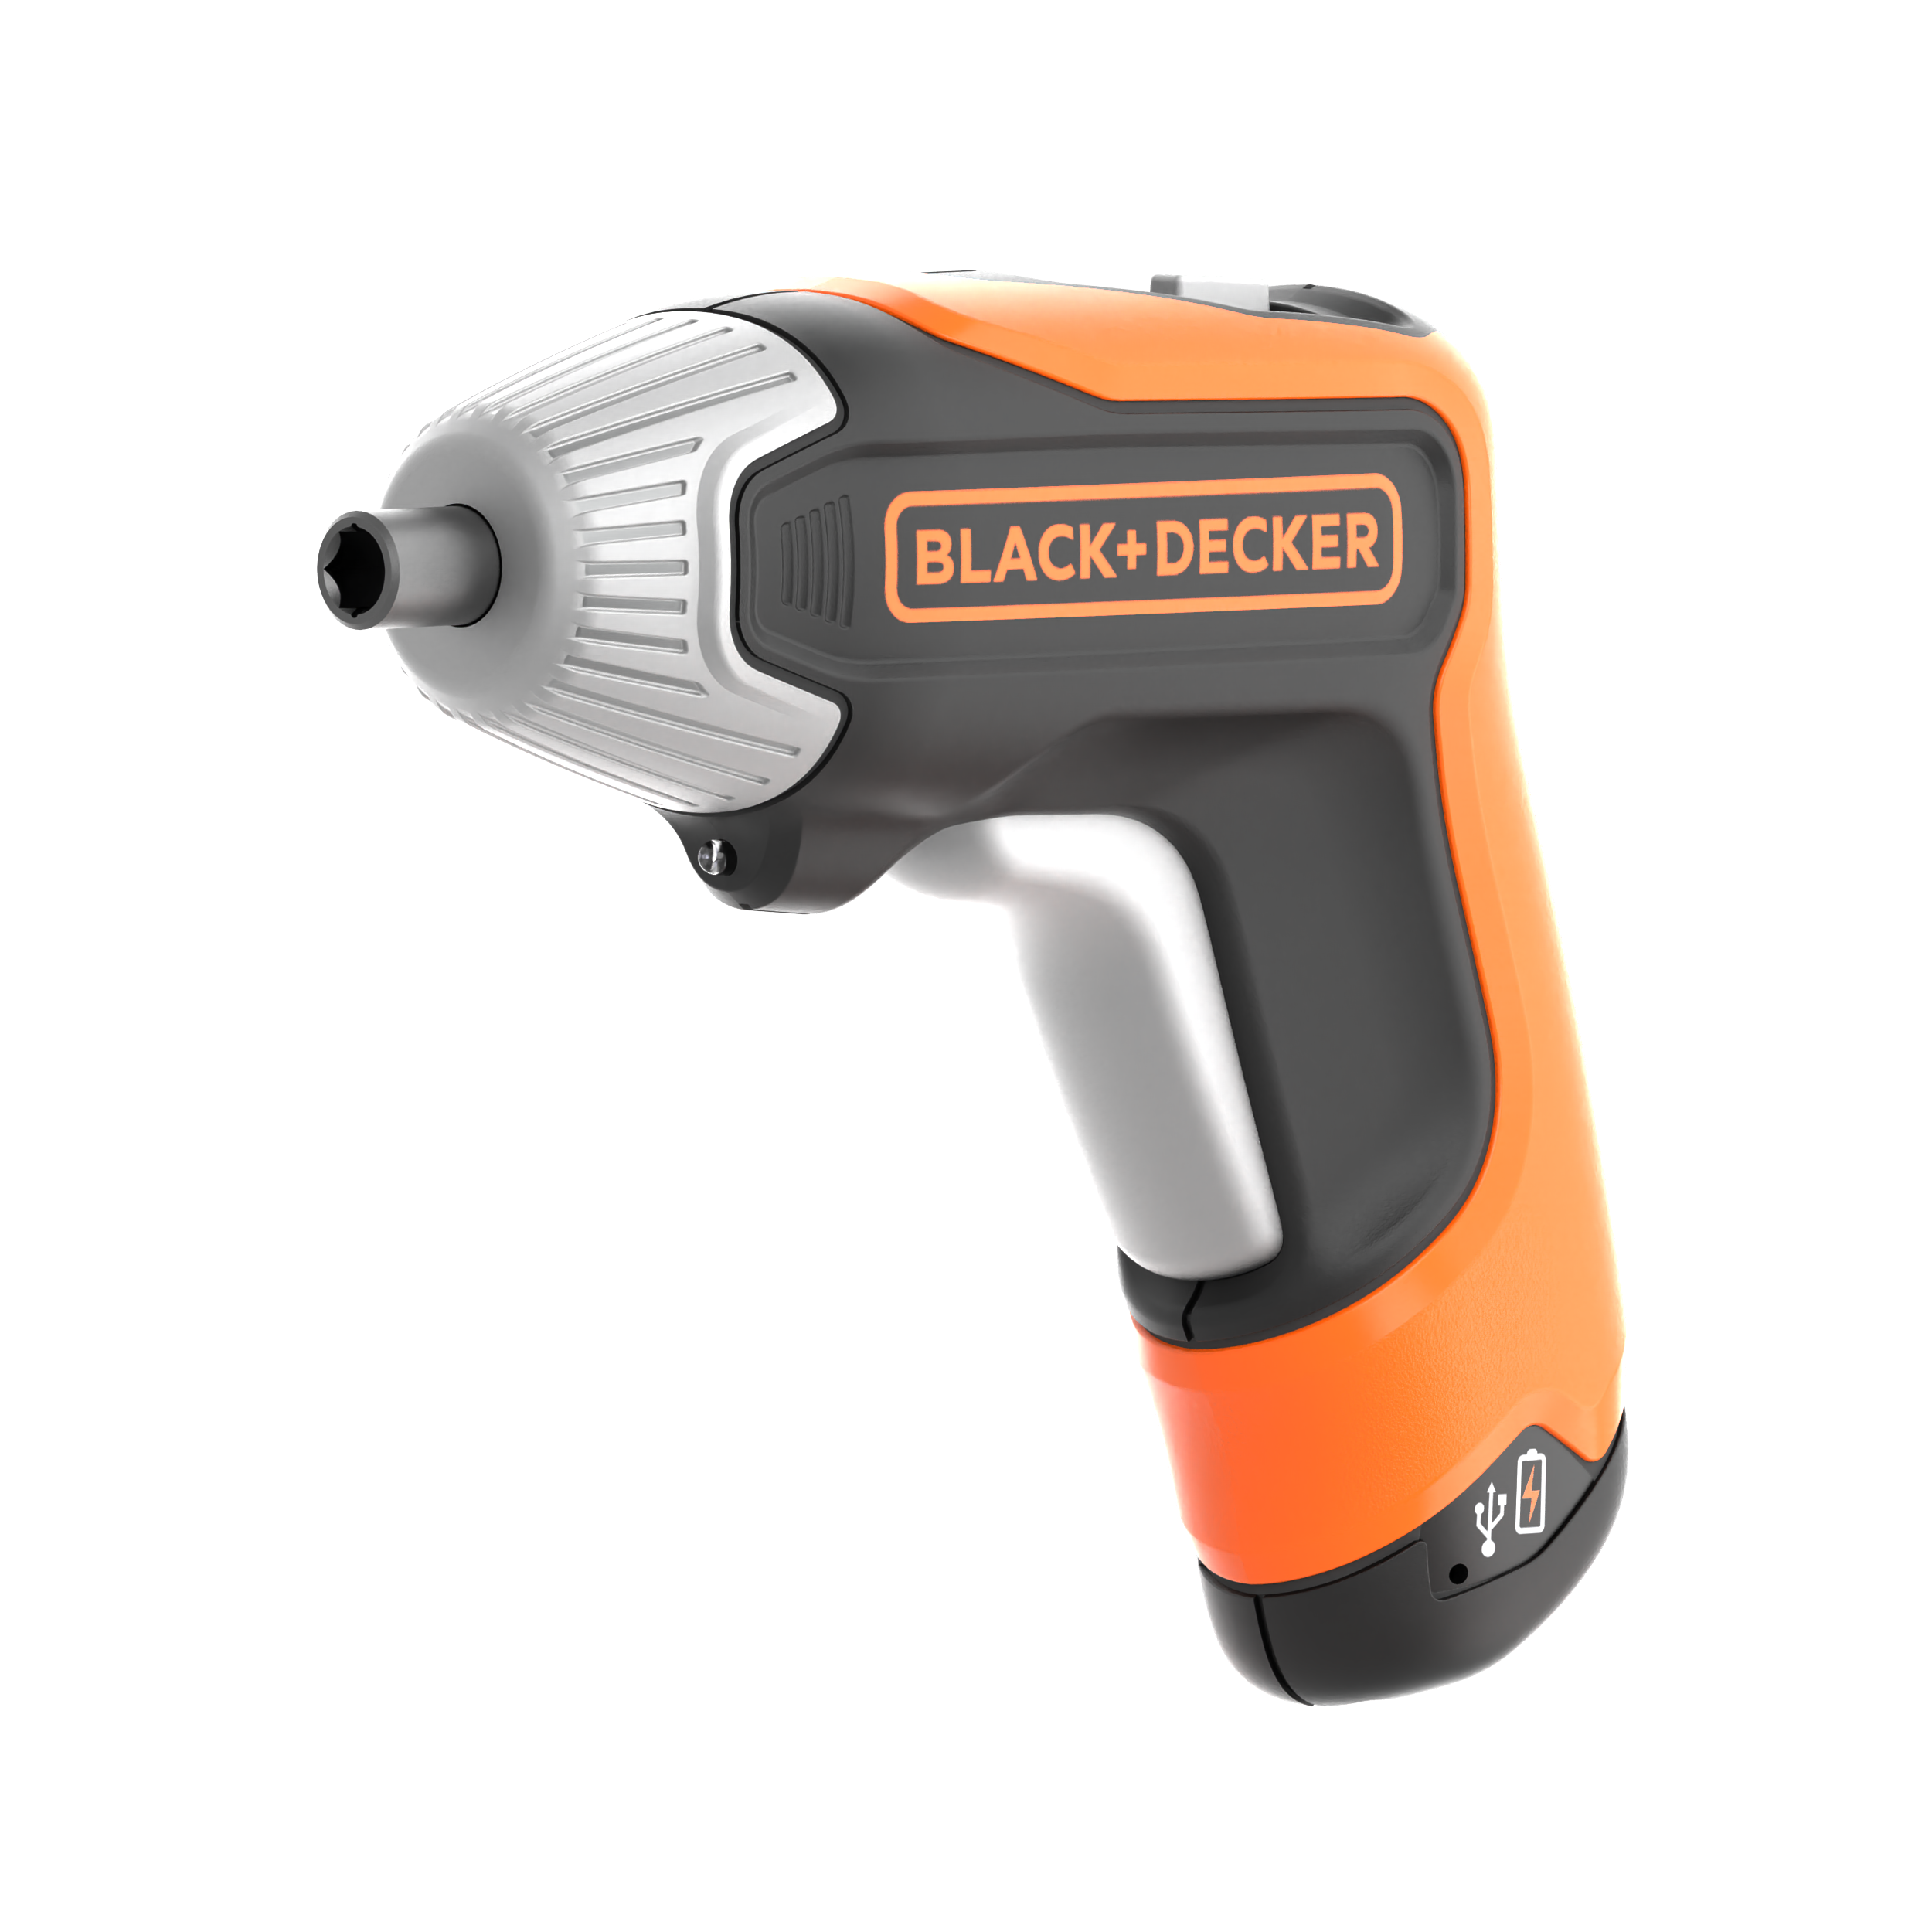 BLACK+DECKER - All the right bits, stored right inside the